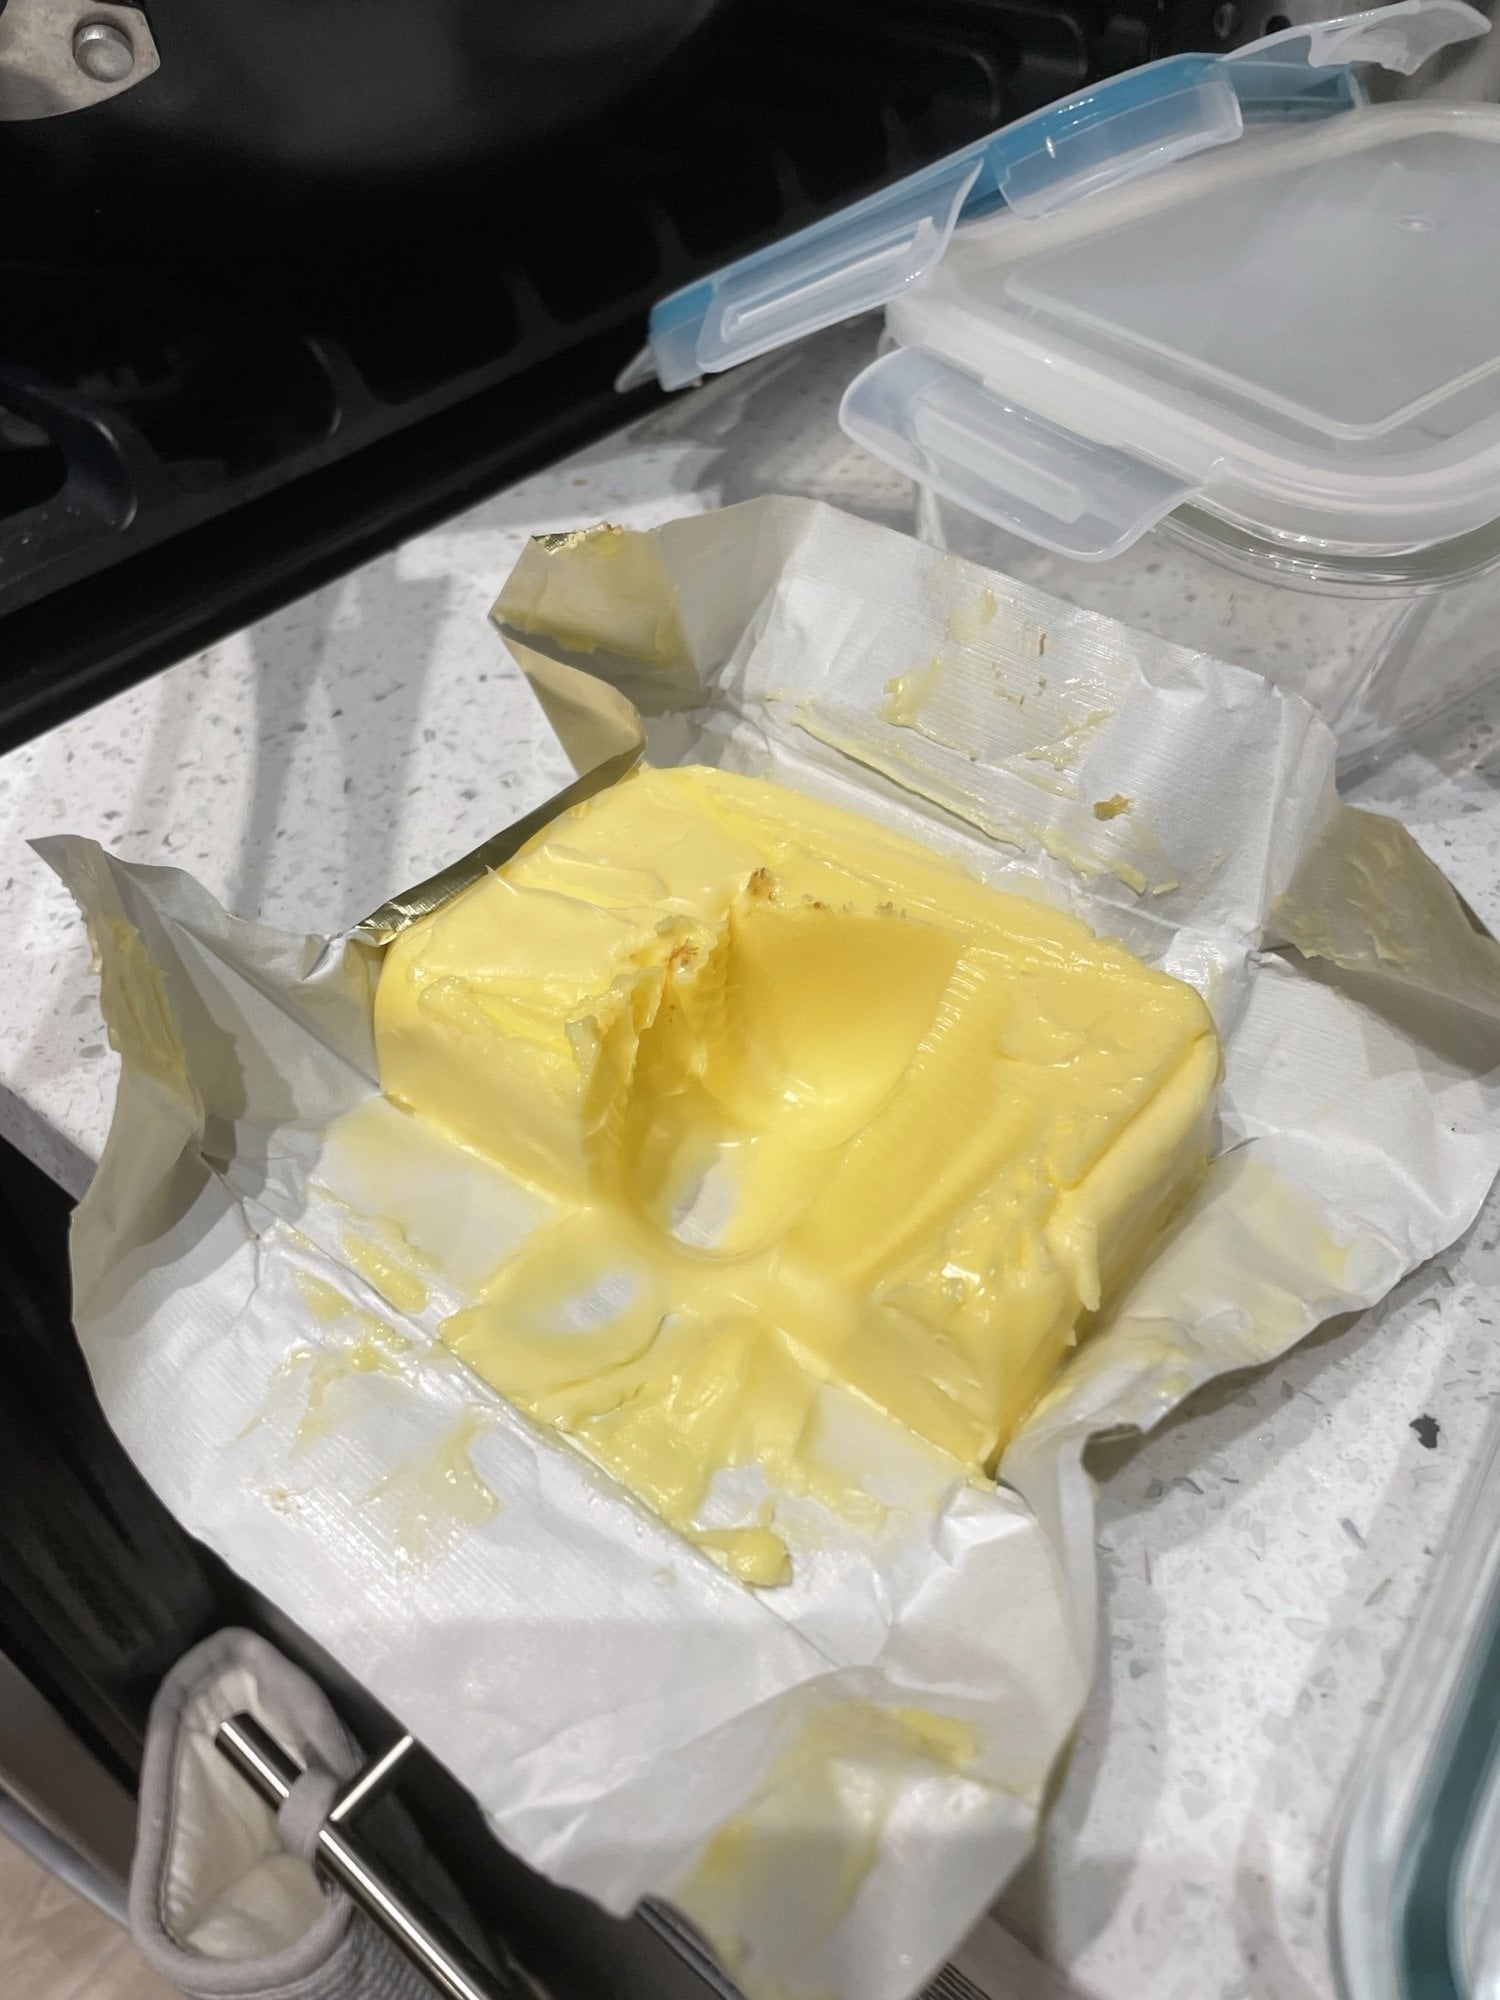 Partial stick of butter with scoop taken out, on open wrapper near containers